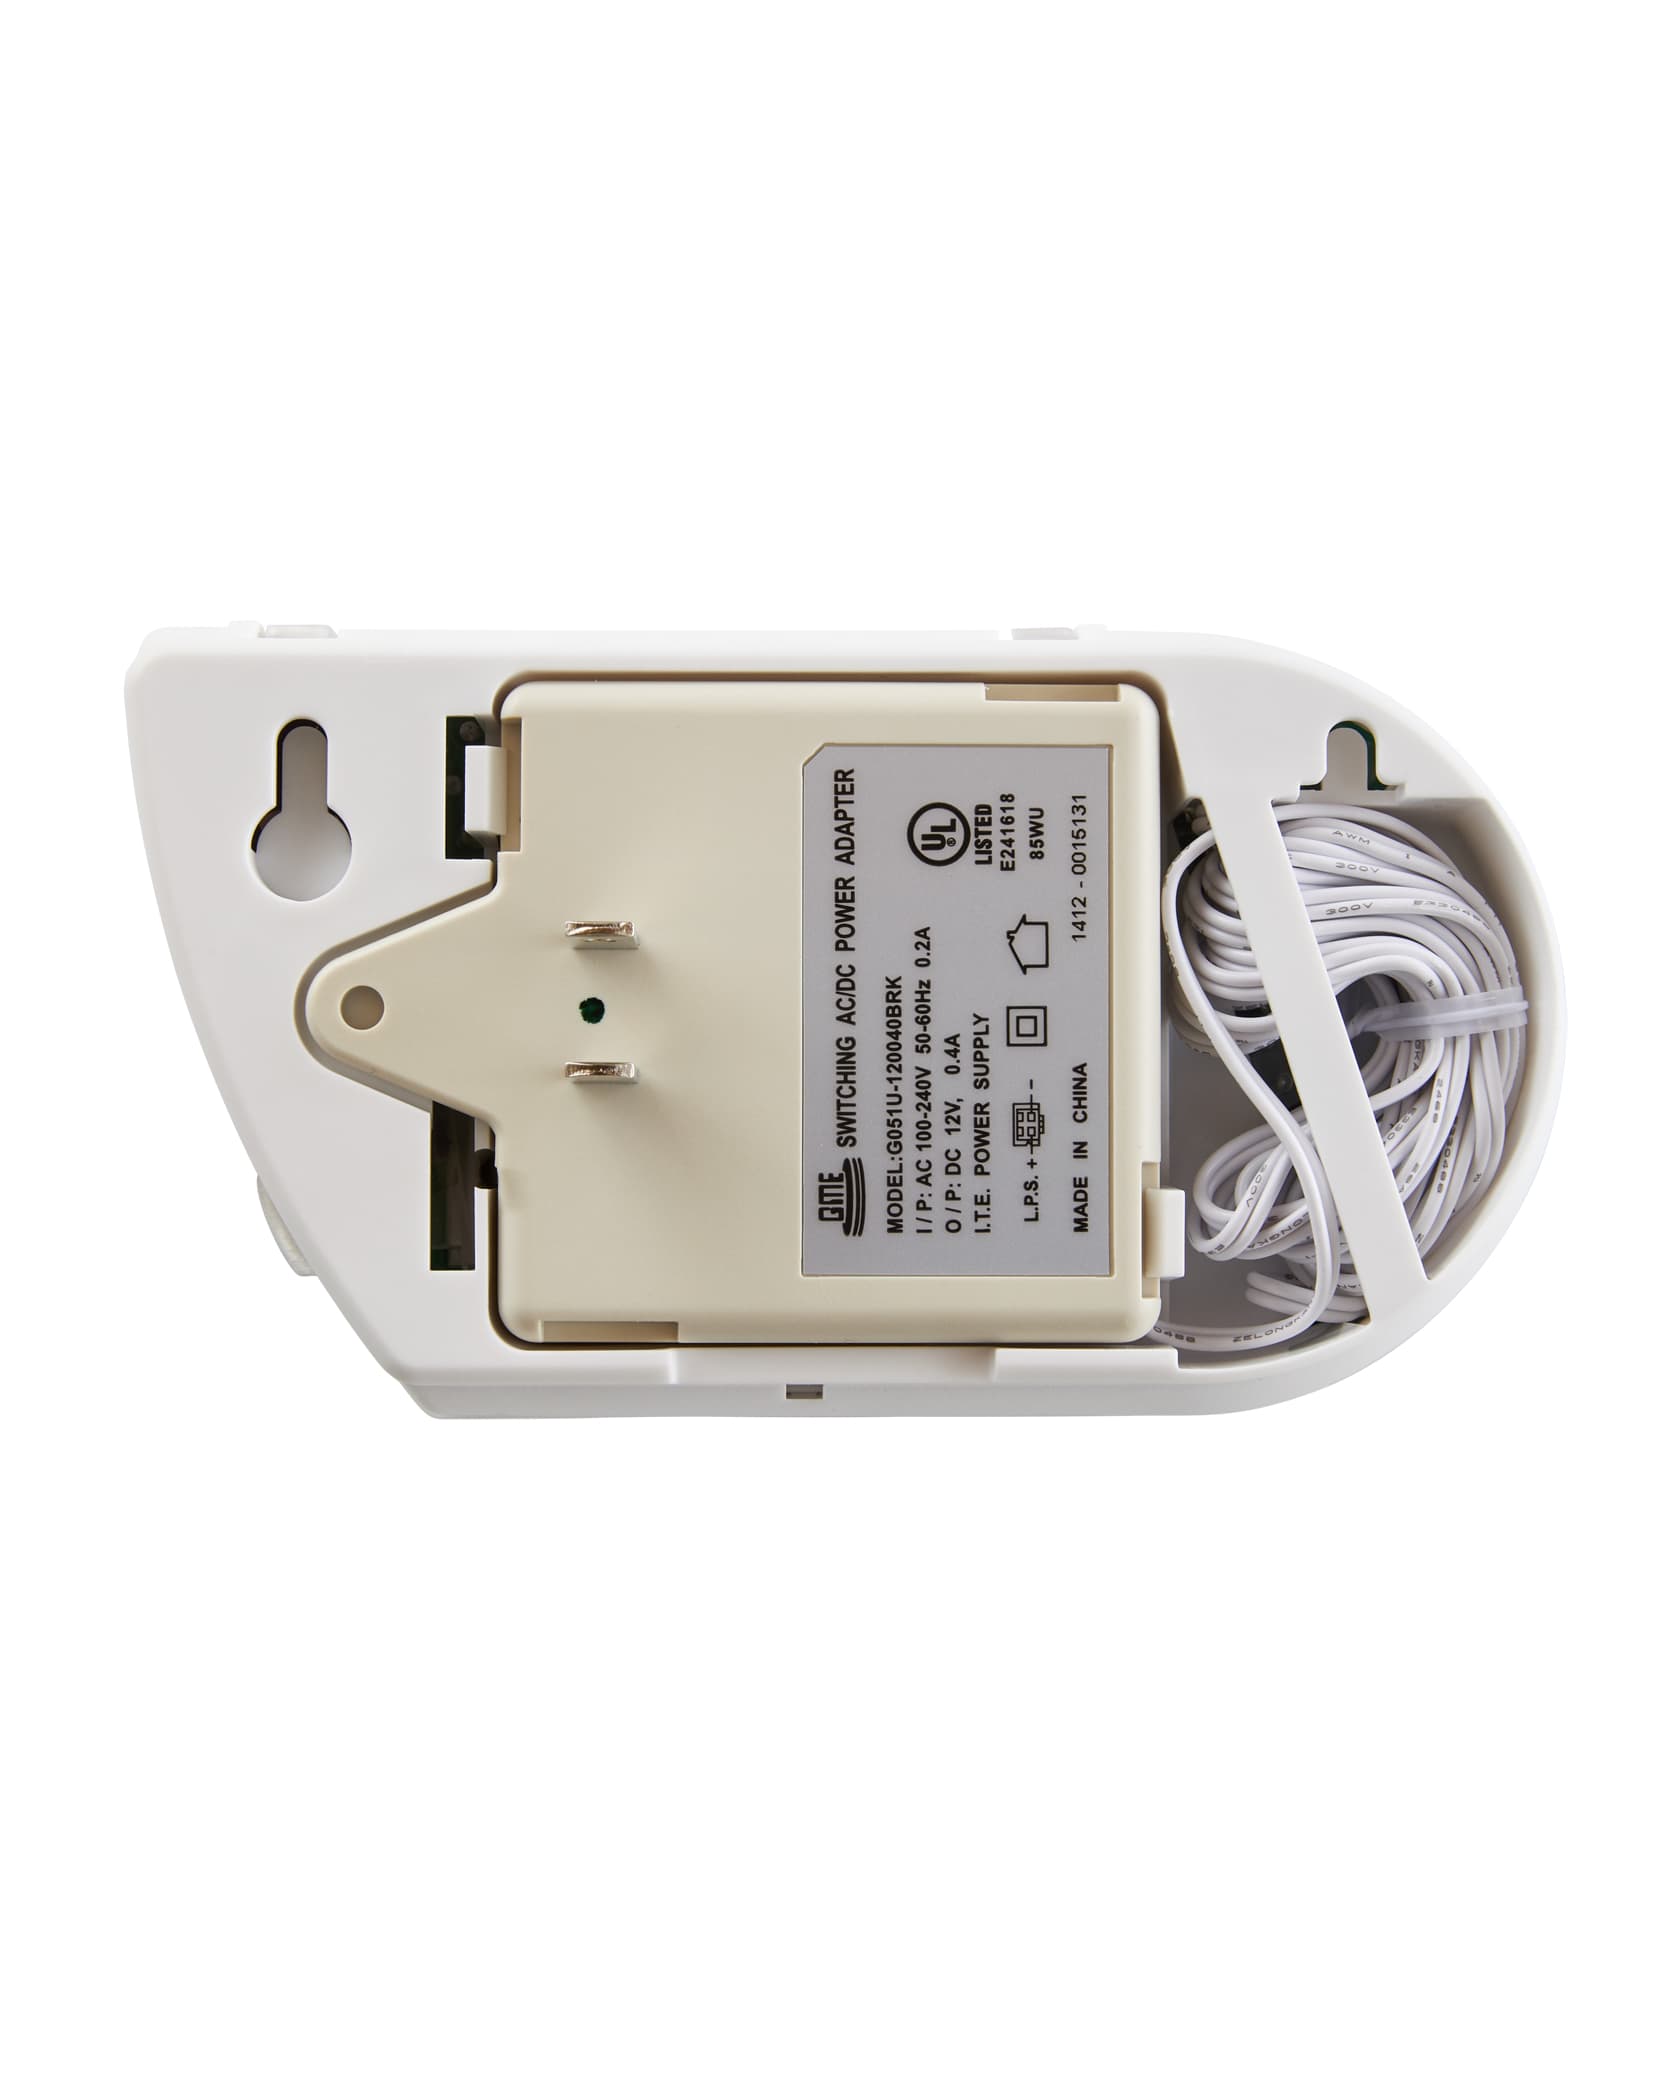 First Alert GCO1CN Combination Explosive Gas and Carbon Monoxide Alarm with Backlit Digital Display - image 5 of 5